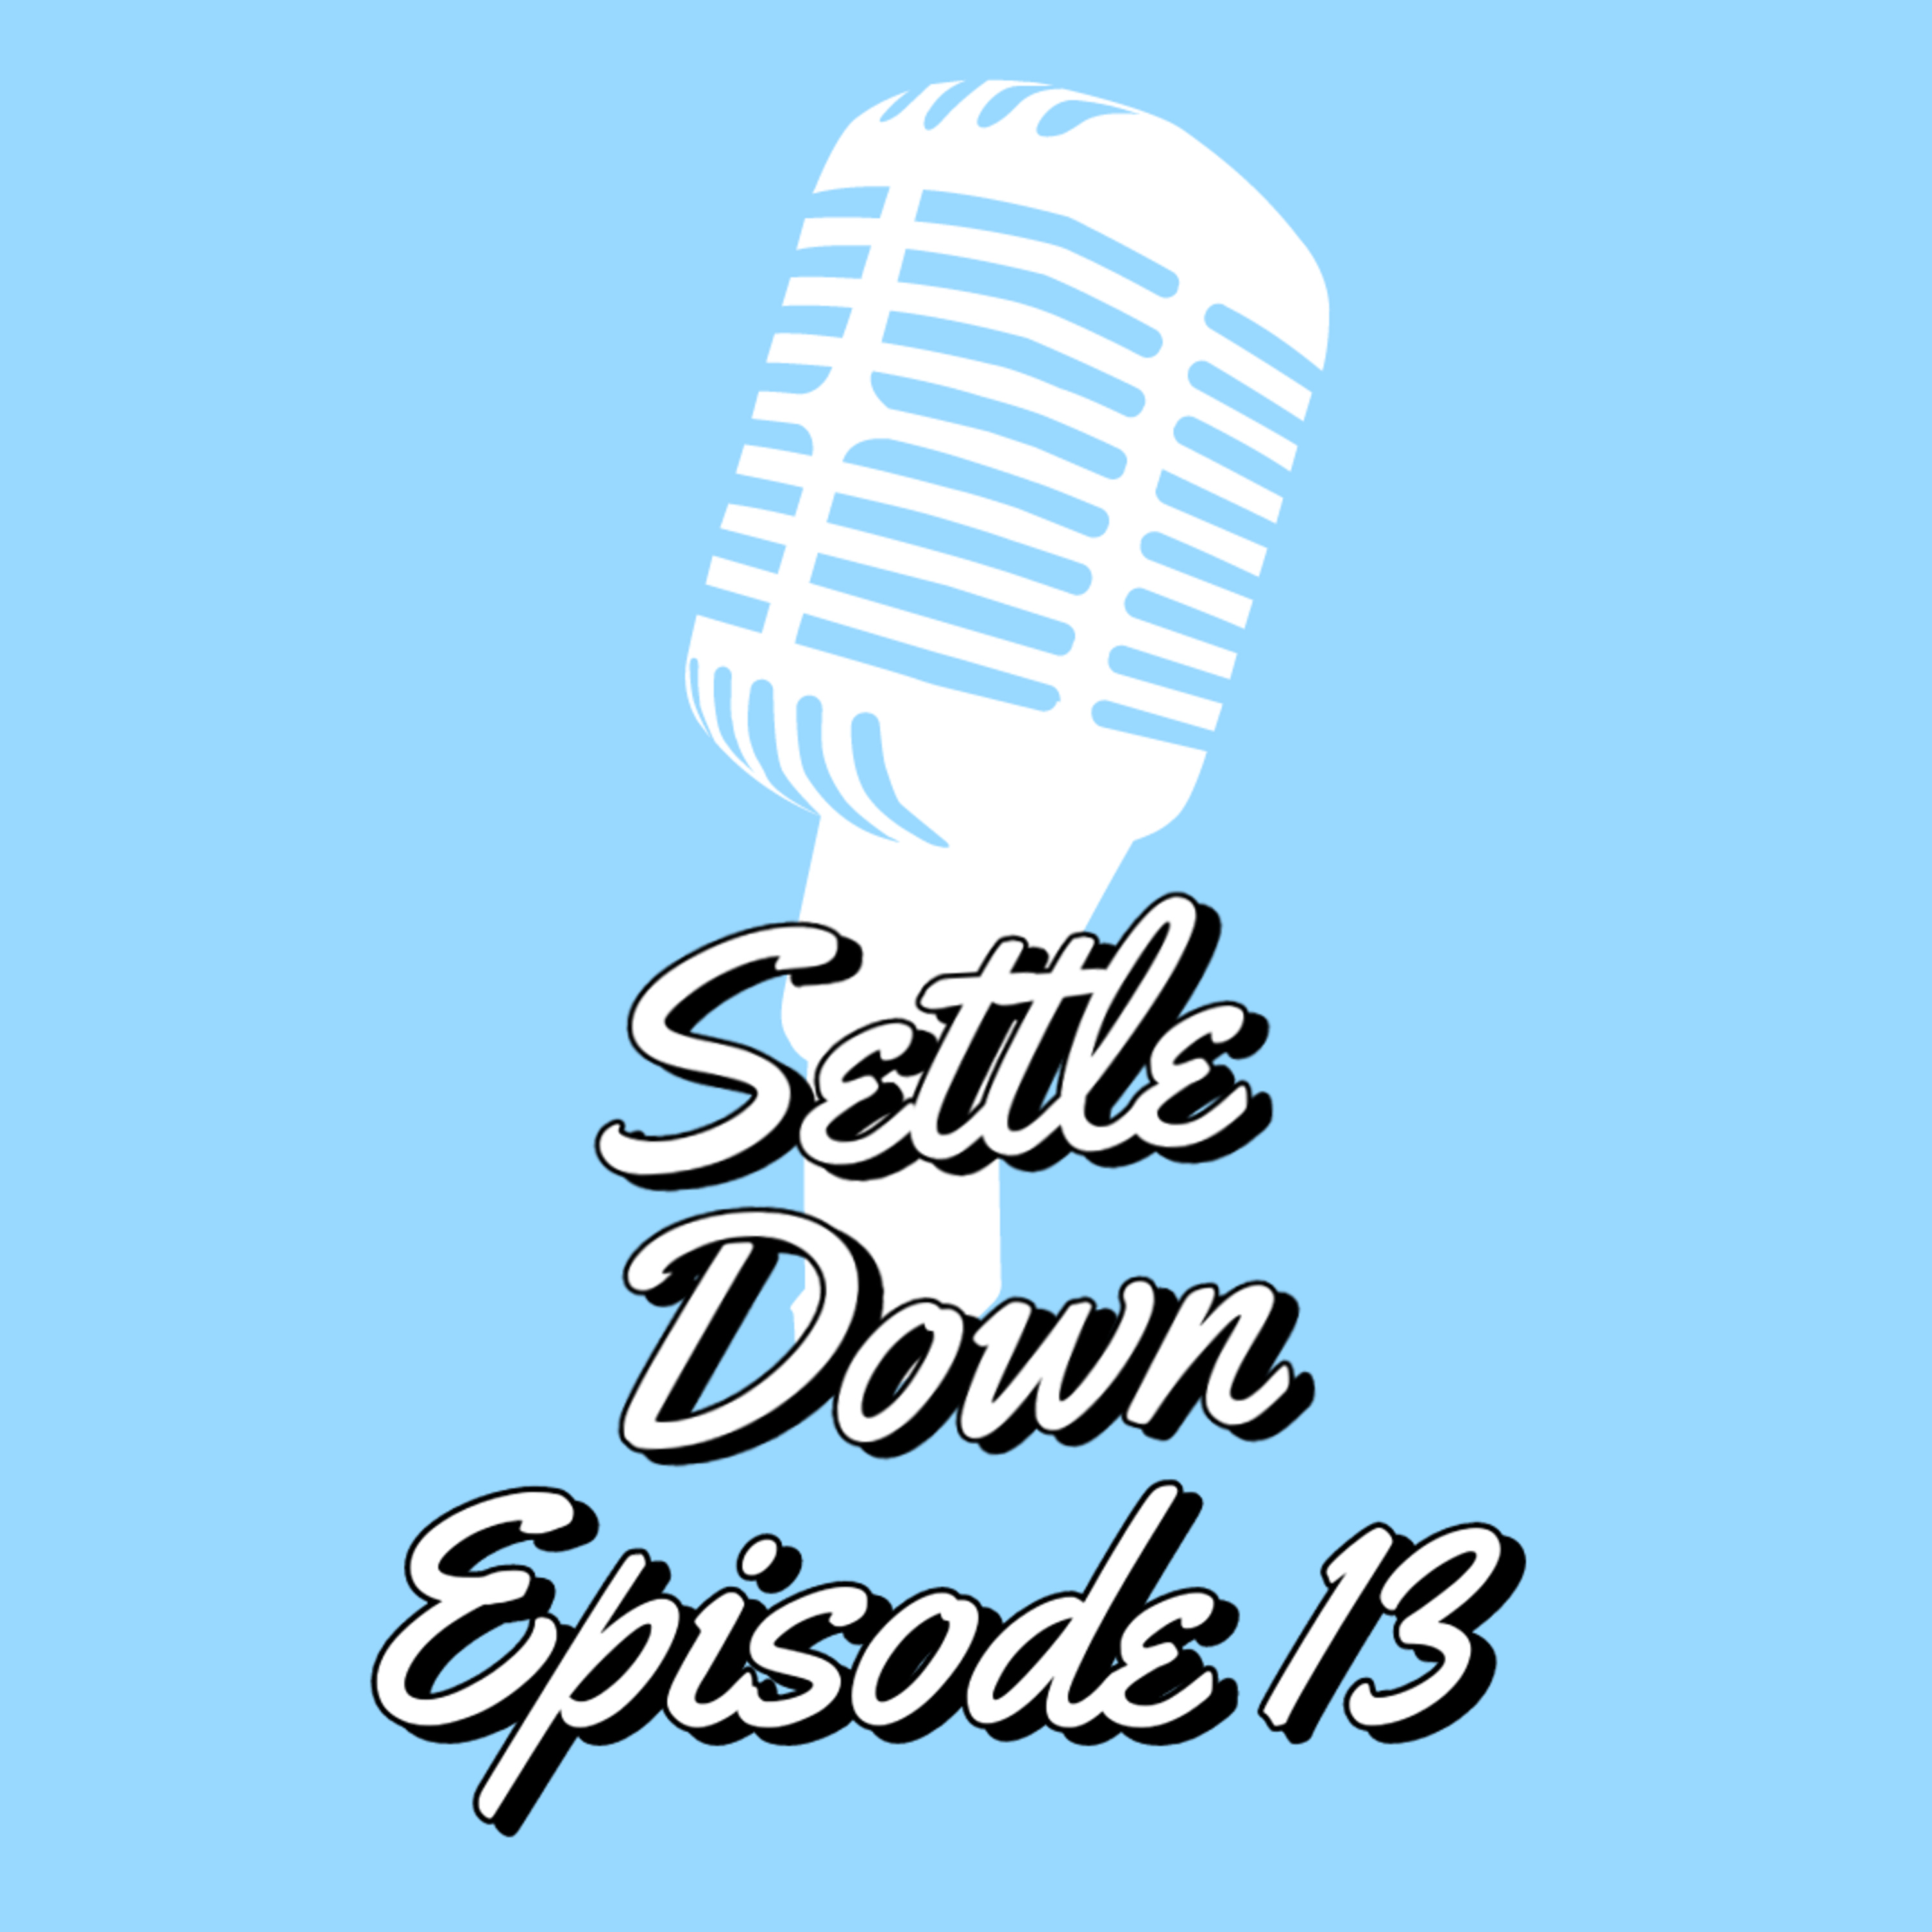 The Settle Down Podcast Episode 13: Boise State Week 1 Preview